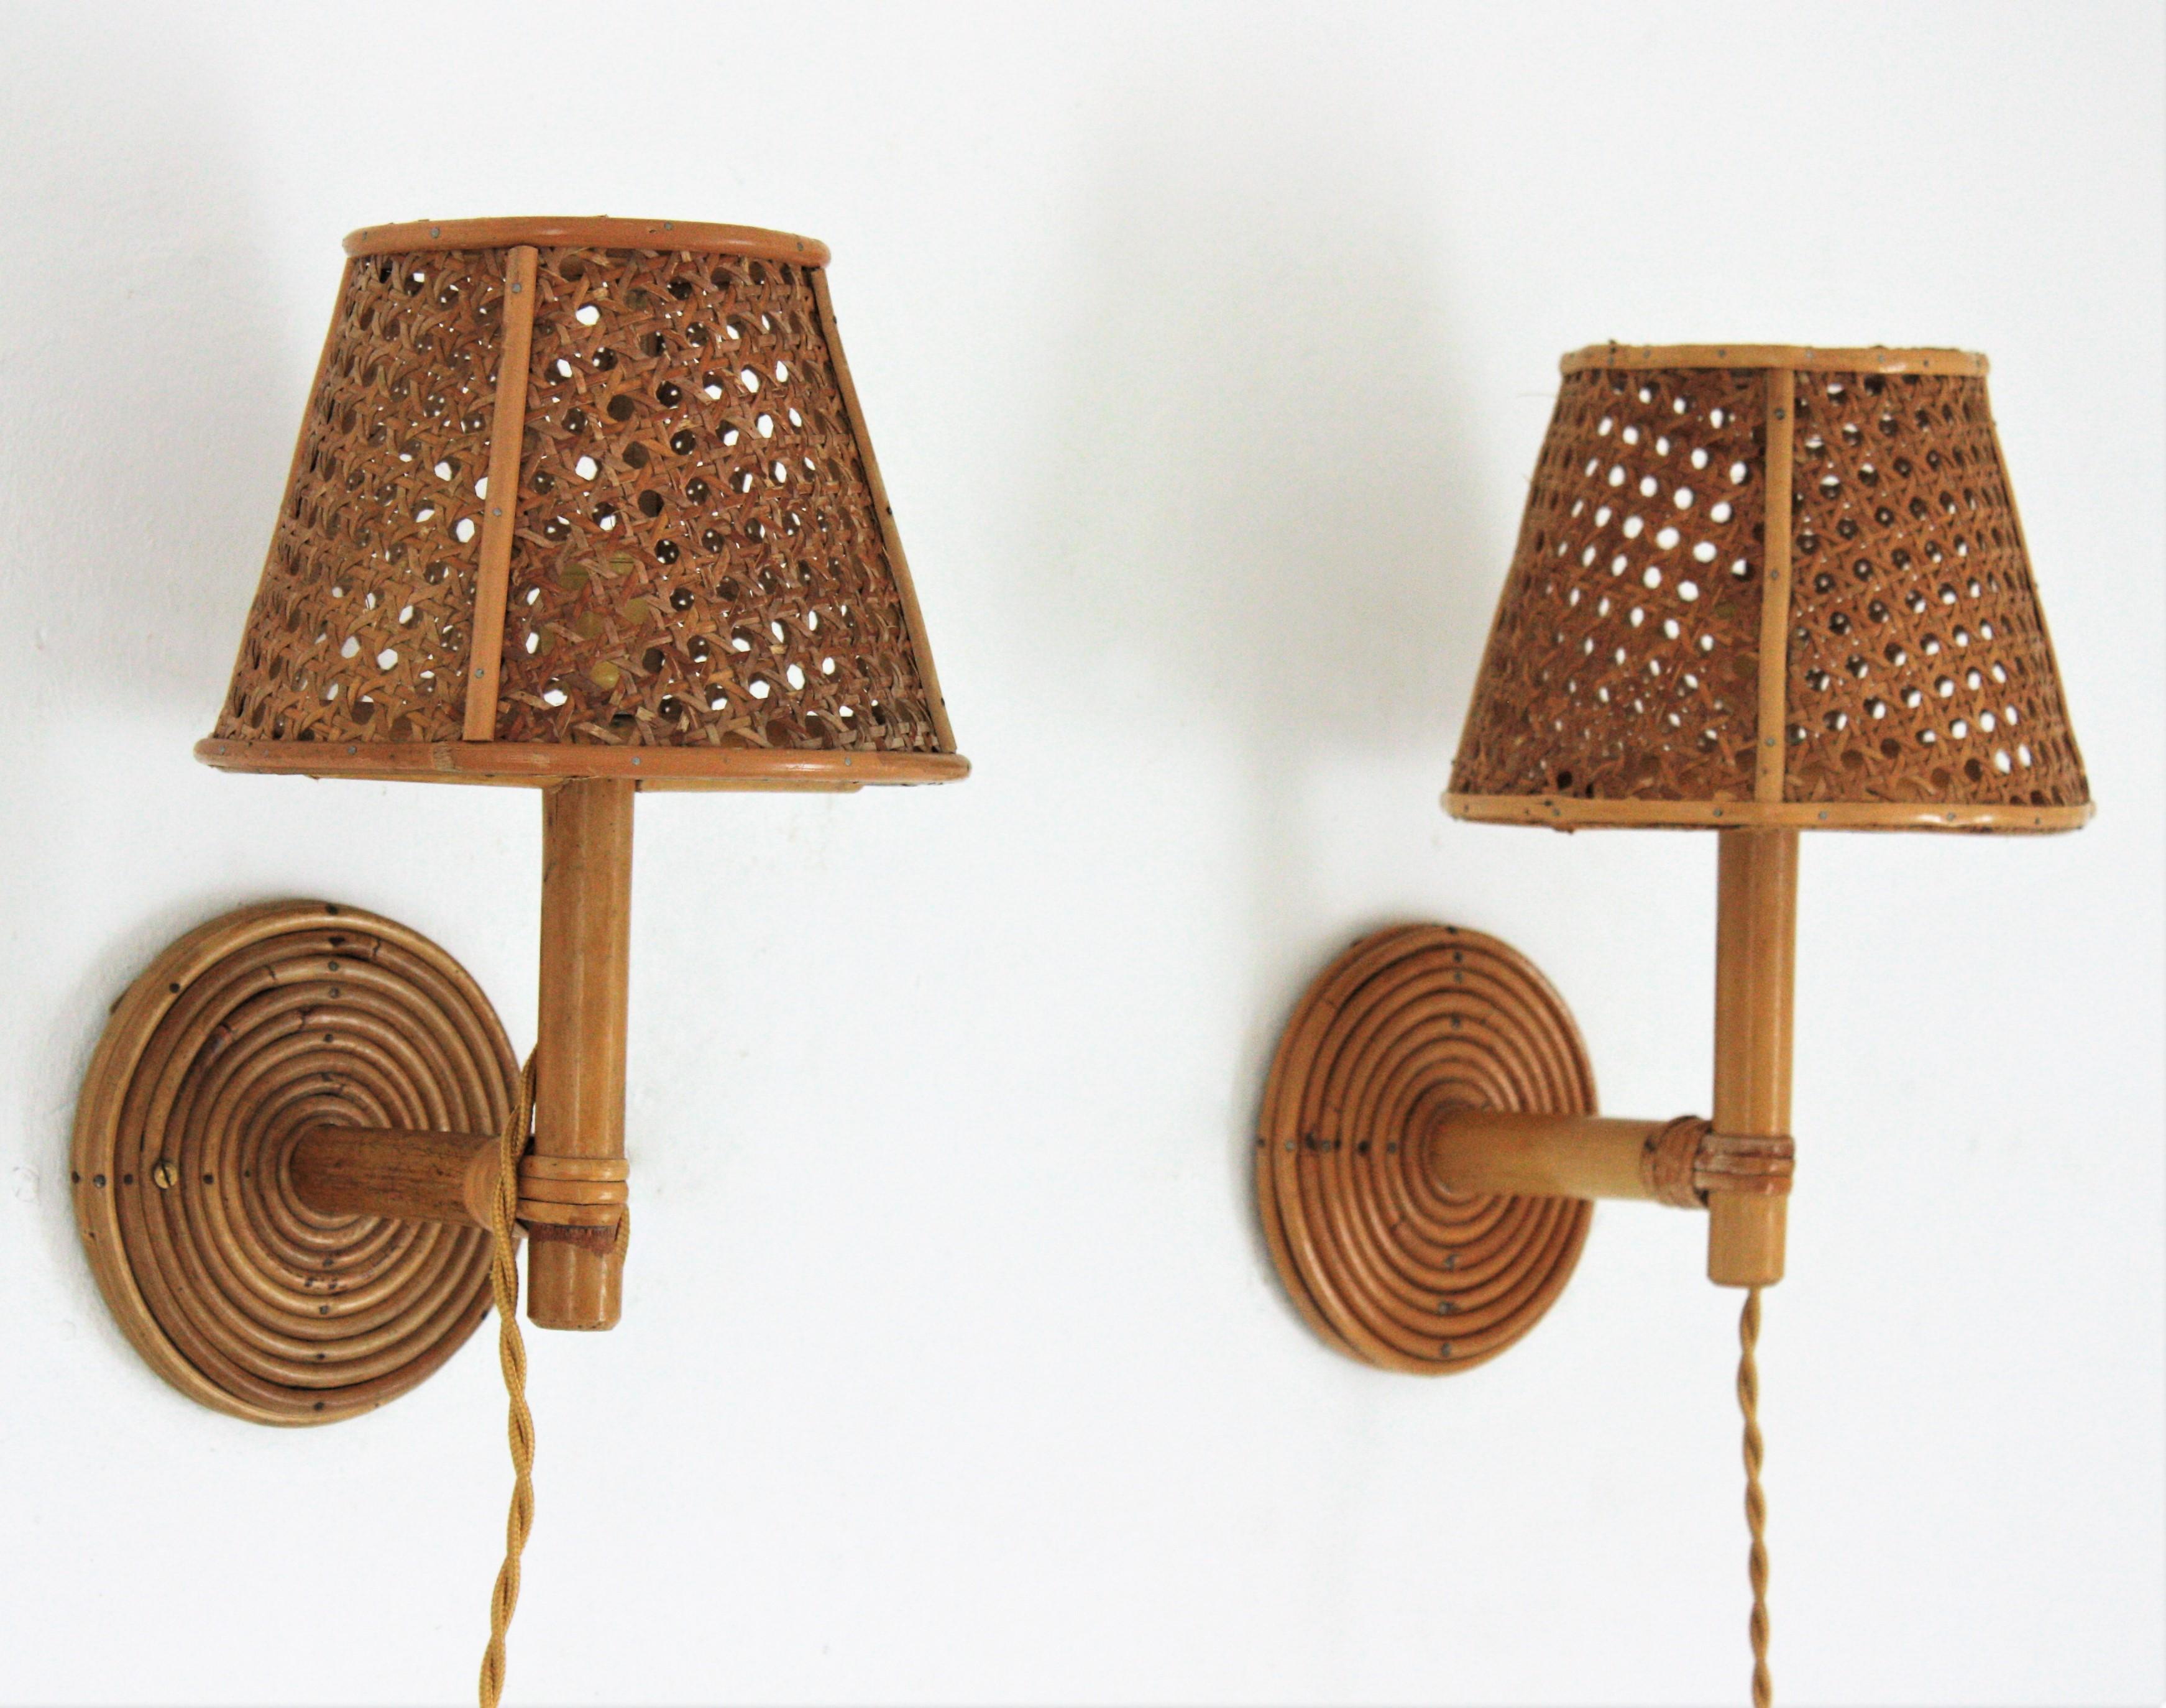 Eye-catching pair of Mid-Century Modern wicker and bamboo wall sconces with wicker weave shades: Italy, 1960s.
These wall lights feature round backplates covered with wicker holding bamboo arms with a wicker wire lampshades.
They will be the perfect